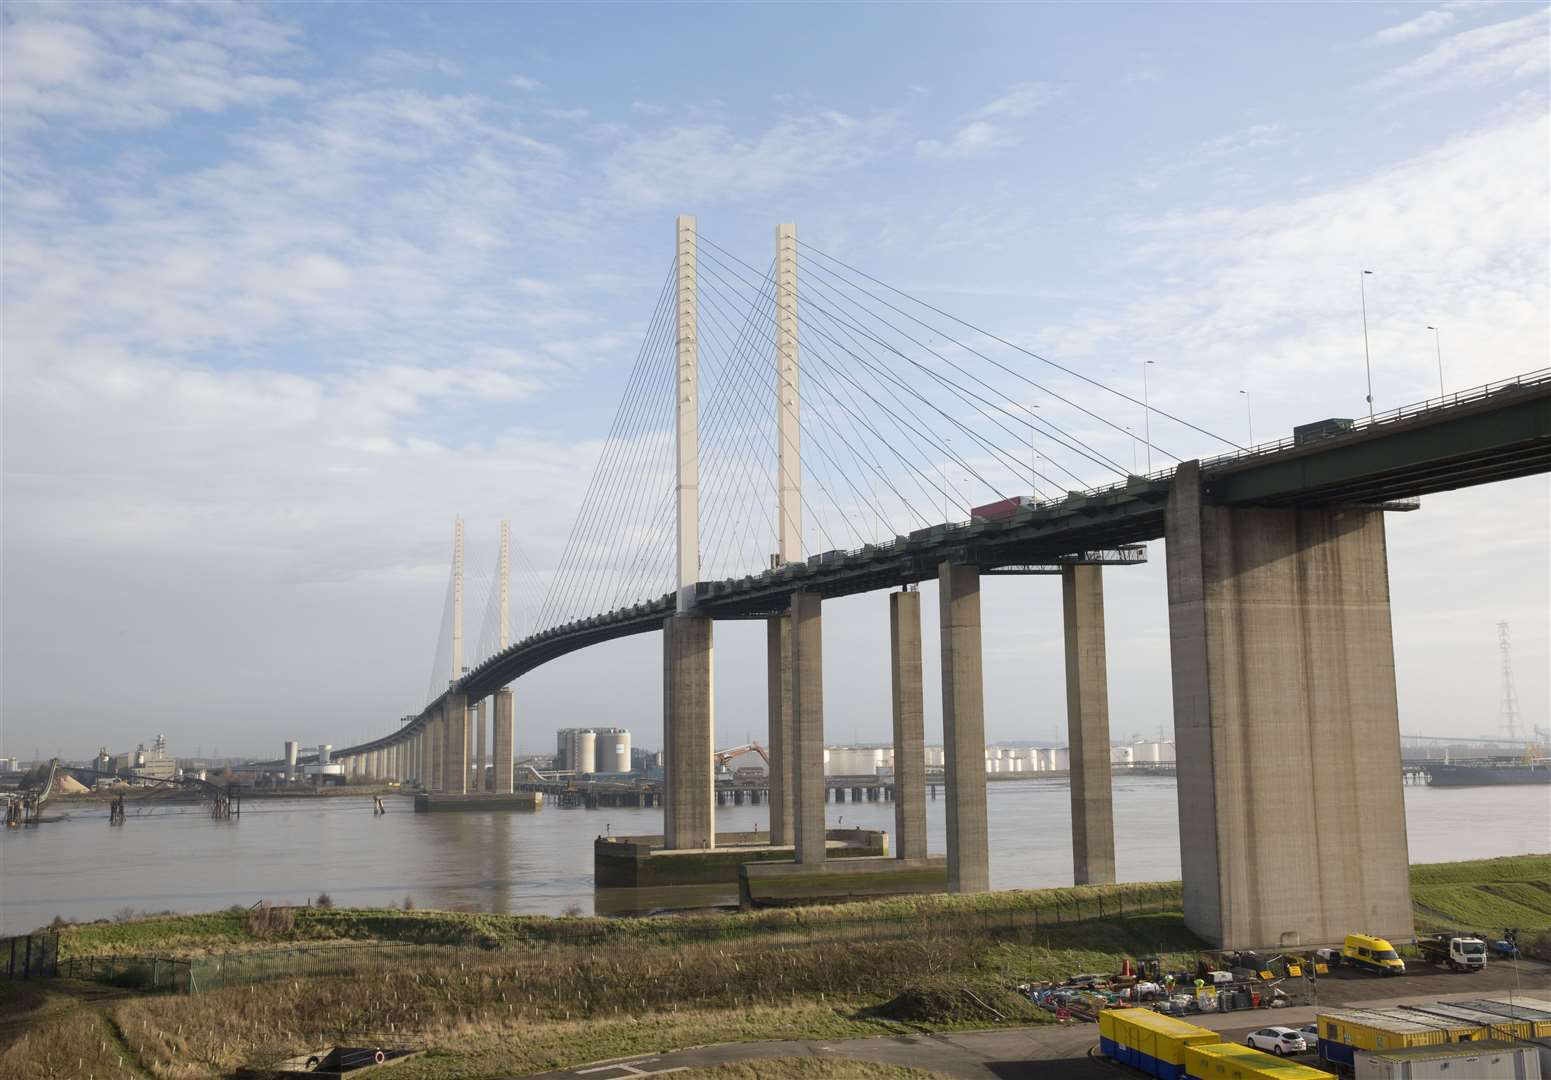 The Dartford Crossing is currently closed